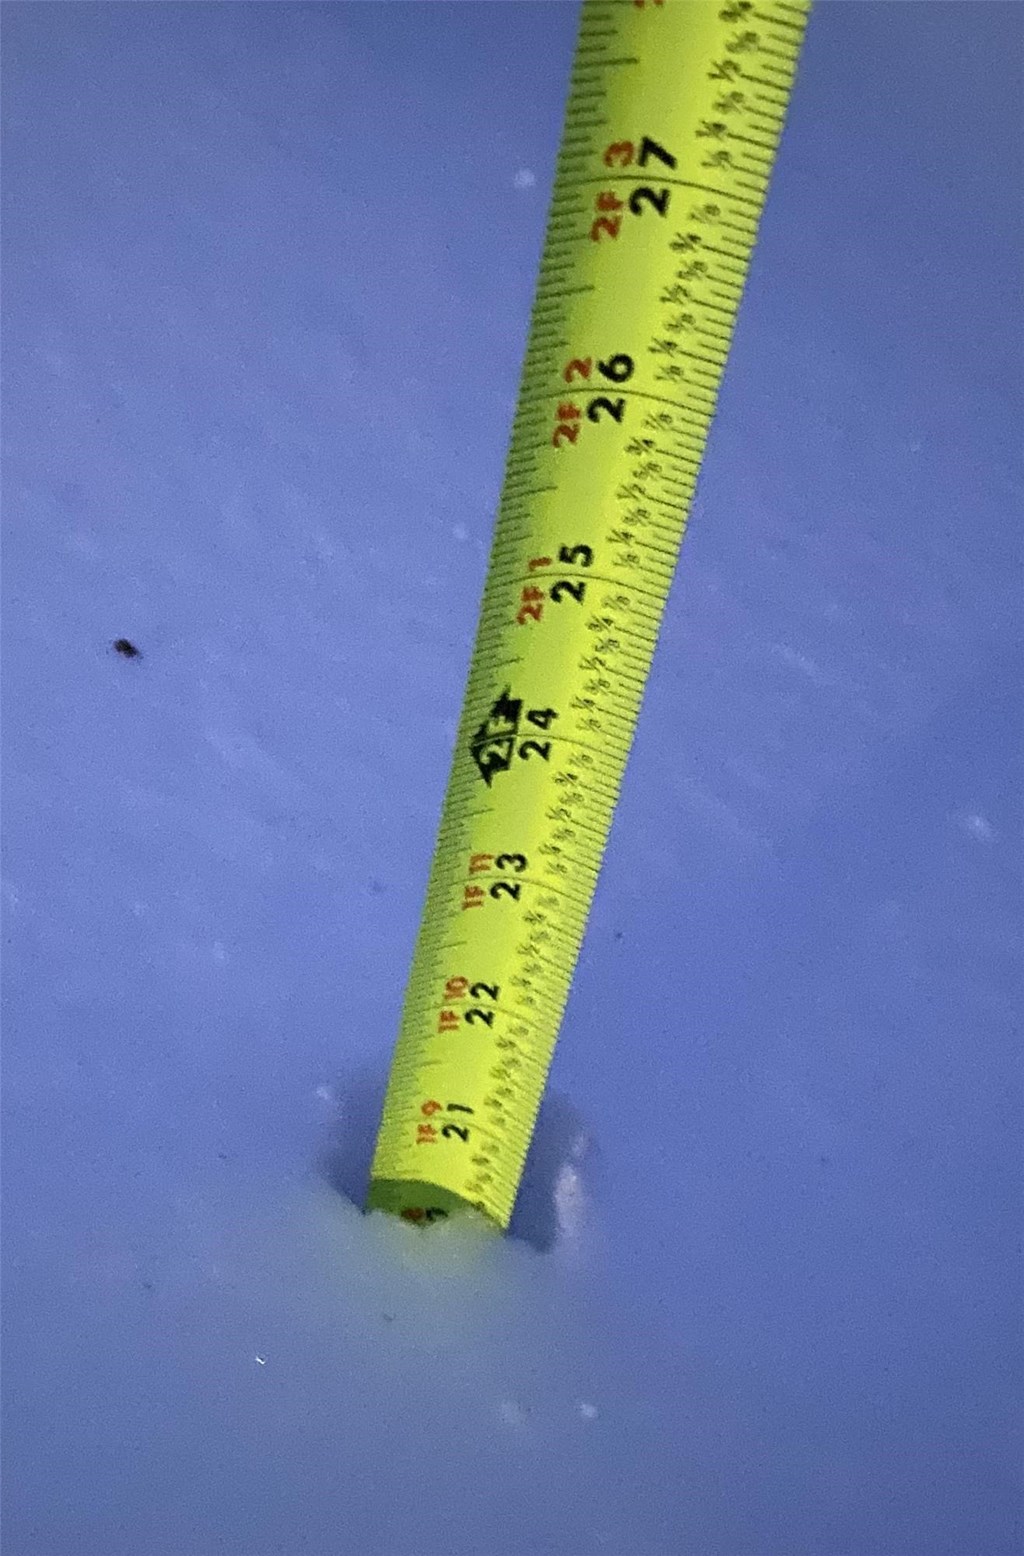 Over 20 inches of snow fell during the Jan-Feb 2021 snow storm!